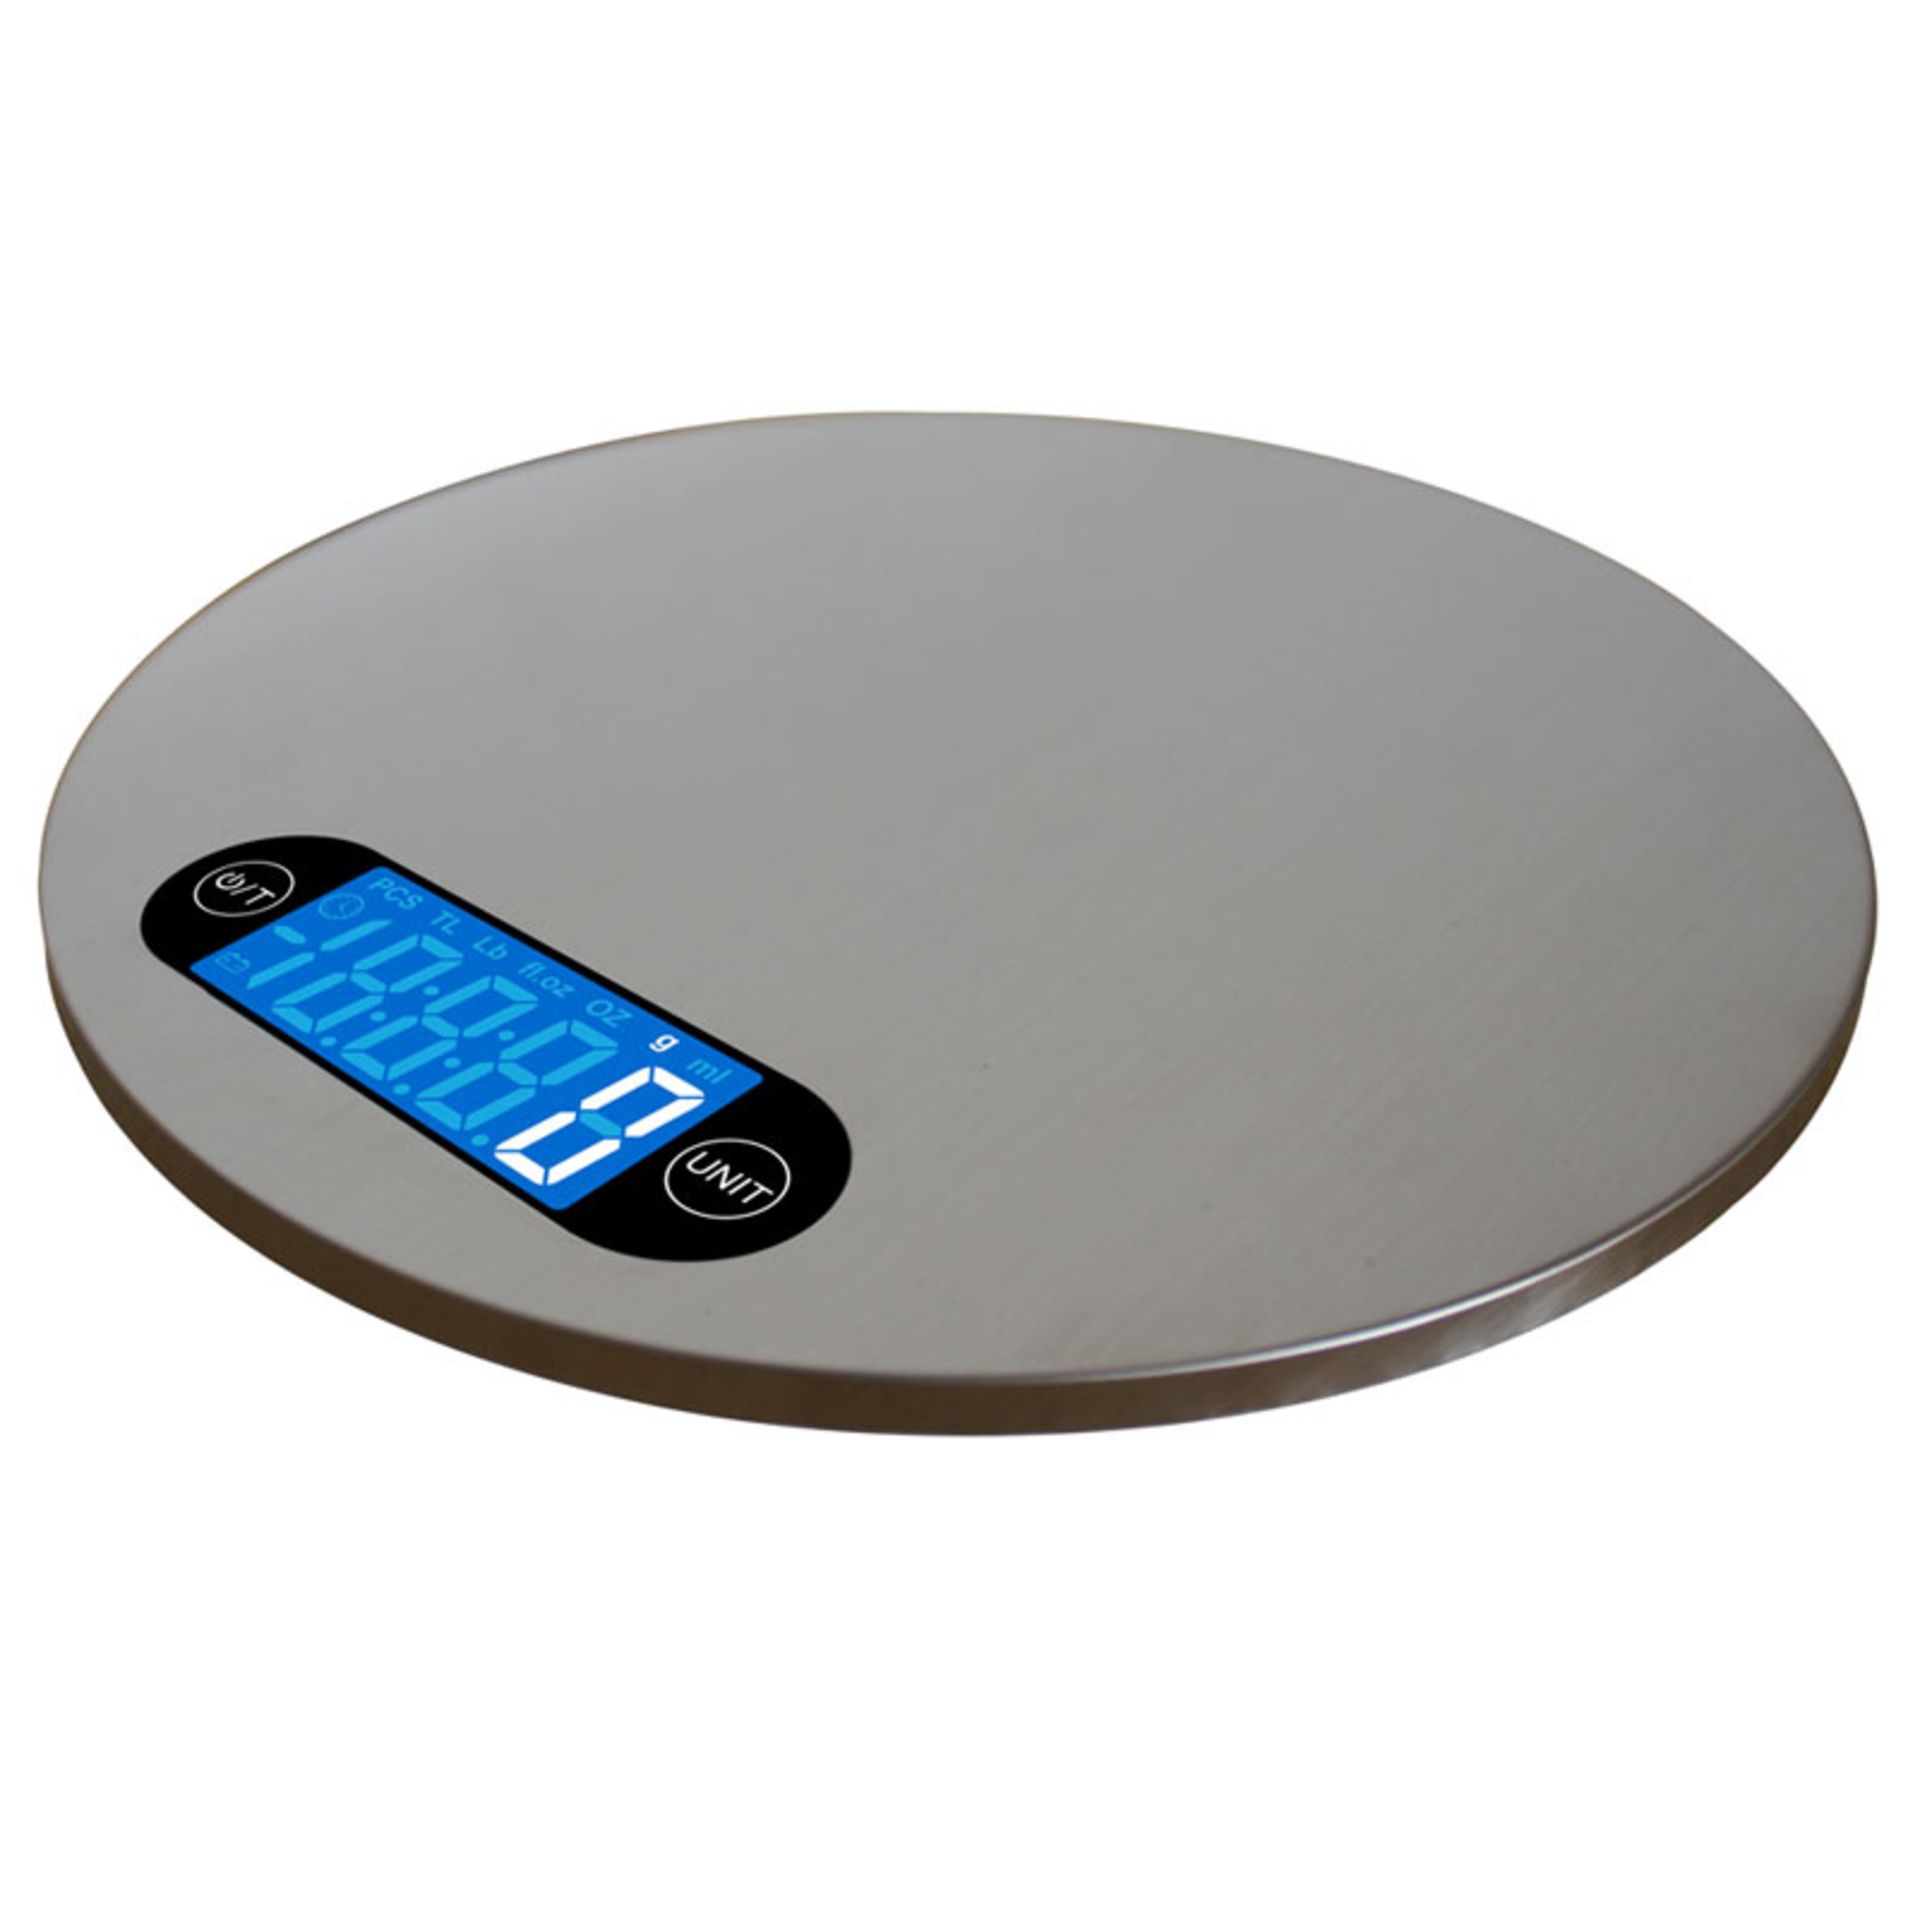 V *TRADE QTY* Brand New Digital Kitchen Scales with Large LCD Display in lbs OZs and Grams (Styles - Image 4 of 4